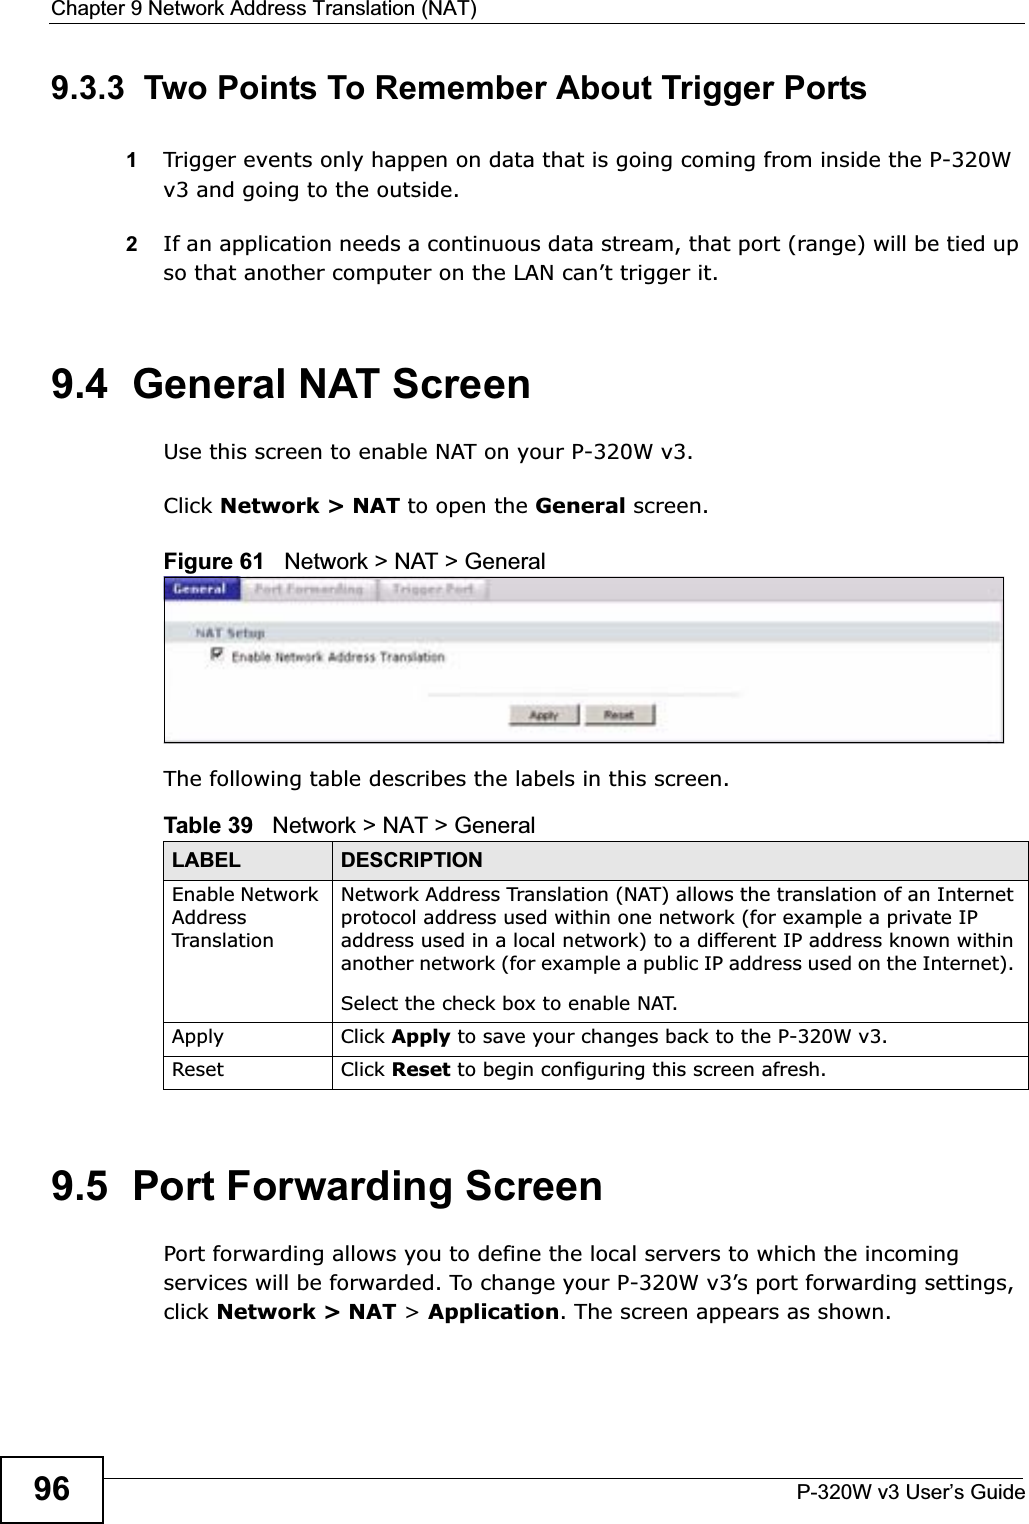 Chapter 9 Network Address Translation (NAT)P-320W v3 User’s Guide969.3.3  Two Points To Remember About Trigger Ports1Trigger events only happen on data that is going coming from inside the P-320W v3 and going to the outside.2If an application needs a continuous data stream, that port (range) will be tied up so that another computer on the LAN can’t trigger it.9.4  General NAT ScreenUse this screen to enable NAT on your P-320W v3.Click Network &gt; NAT to open the General screen.Figure 61   Network &gt; NAT &gt; General The following table describes the labels in this screen.9.5  Port Forwarding ScreenPort forwarding allows you to define the local servers to which the incoming services will be forwarded. To change your P-320W v3’s port forwarding settings, click Network &gt; NAT &gt; Application. The screen appears as shown.Table 39   Network &gt; NAT &gt; GeneralLABEL DESCRIPTIONEnable Network AddressTranslationNetwork Address Translation (NAT) allows the translation of an Internet protocol address used within one network (for example a private IP address used in a local network) to a different IP address known within another network (for example a public IP address used on the Internet). Select the check box to enable NAT.Apply Click Apply to save your changes back to the P-320W v3.Reset Click Reset to begin configuring this screen afresh.